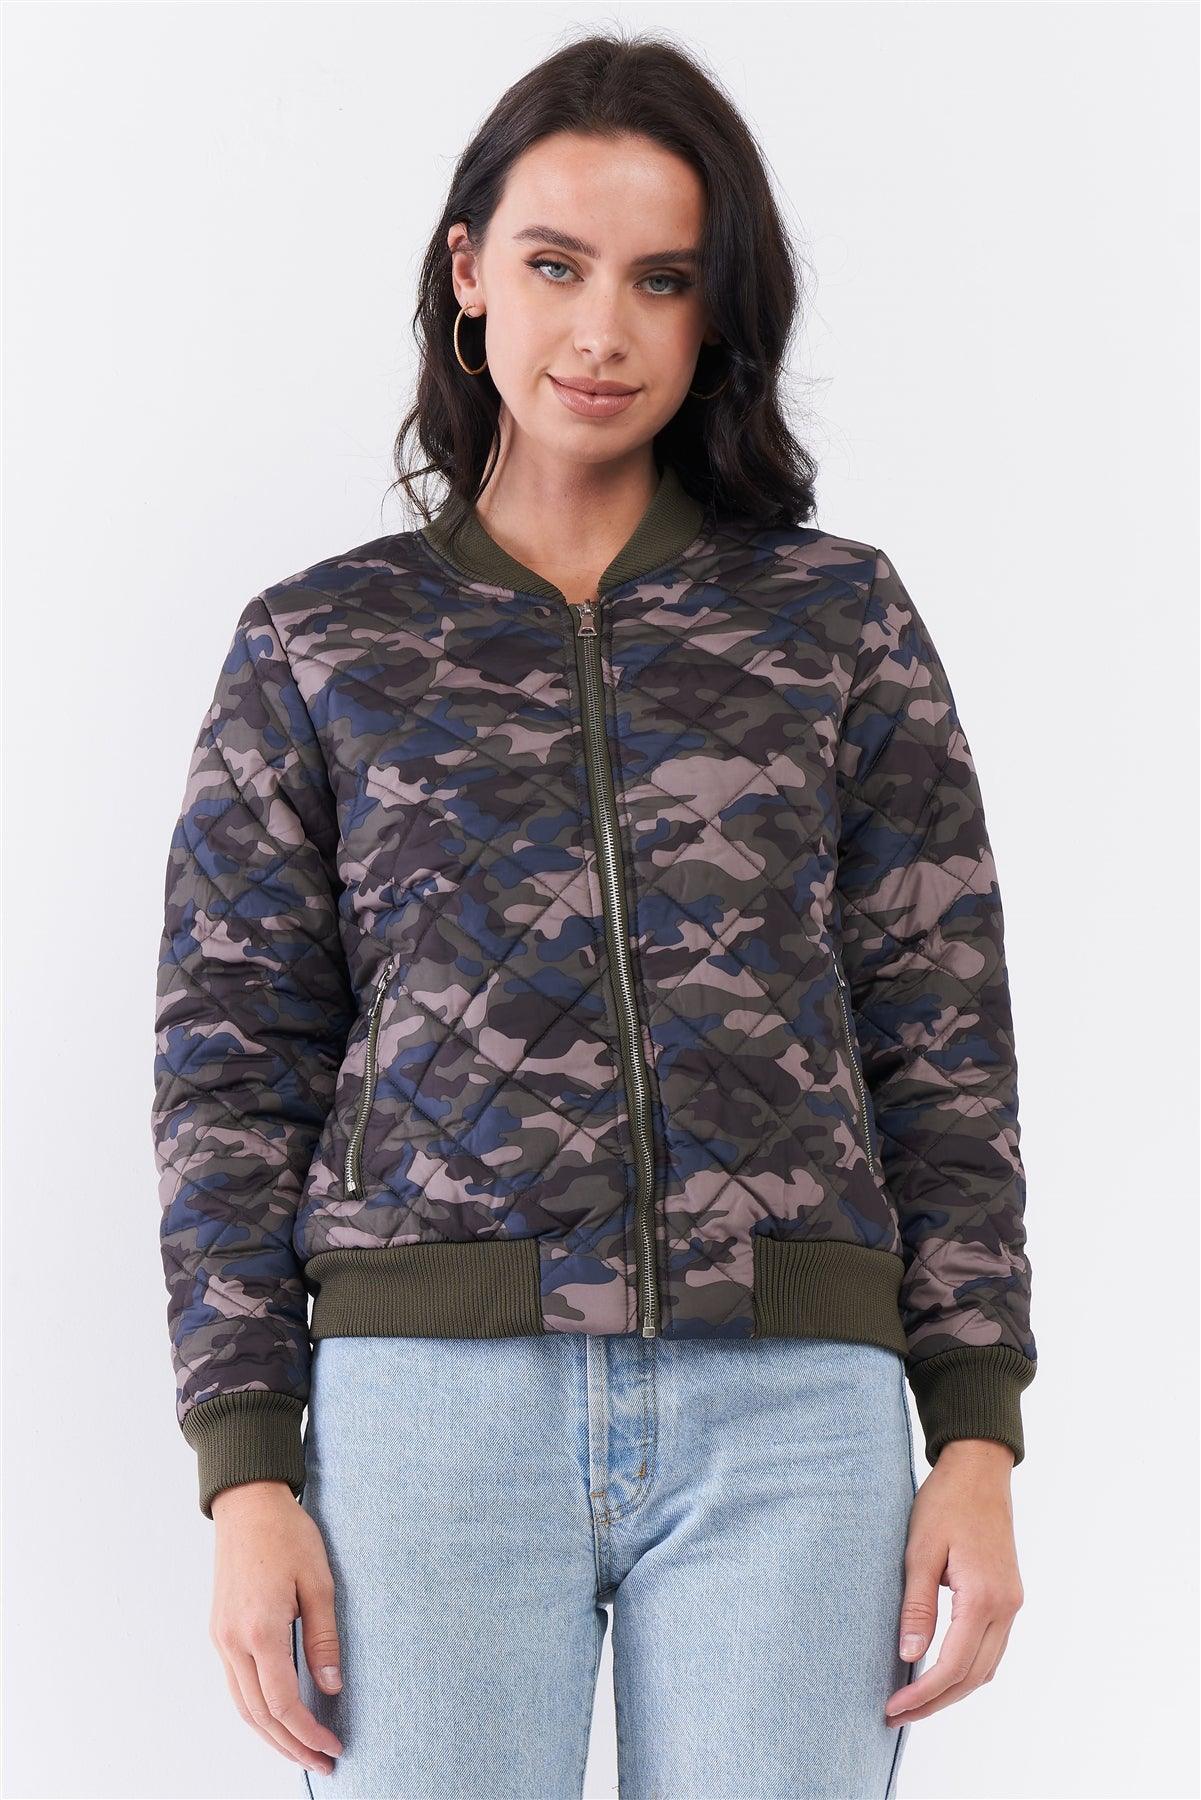 Olive Camo Print Quilted Puff Sleeve Front Zip-Up Winter Jacket /1-2-2-1